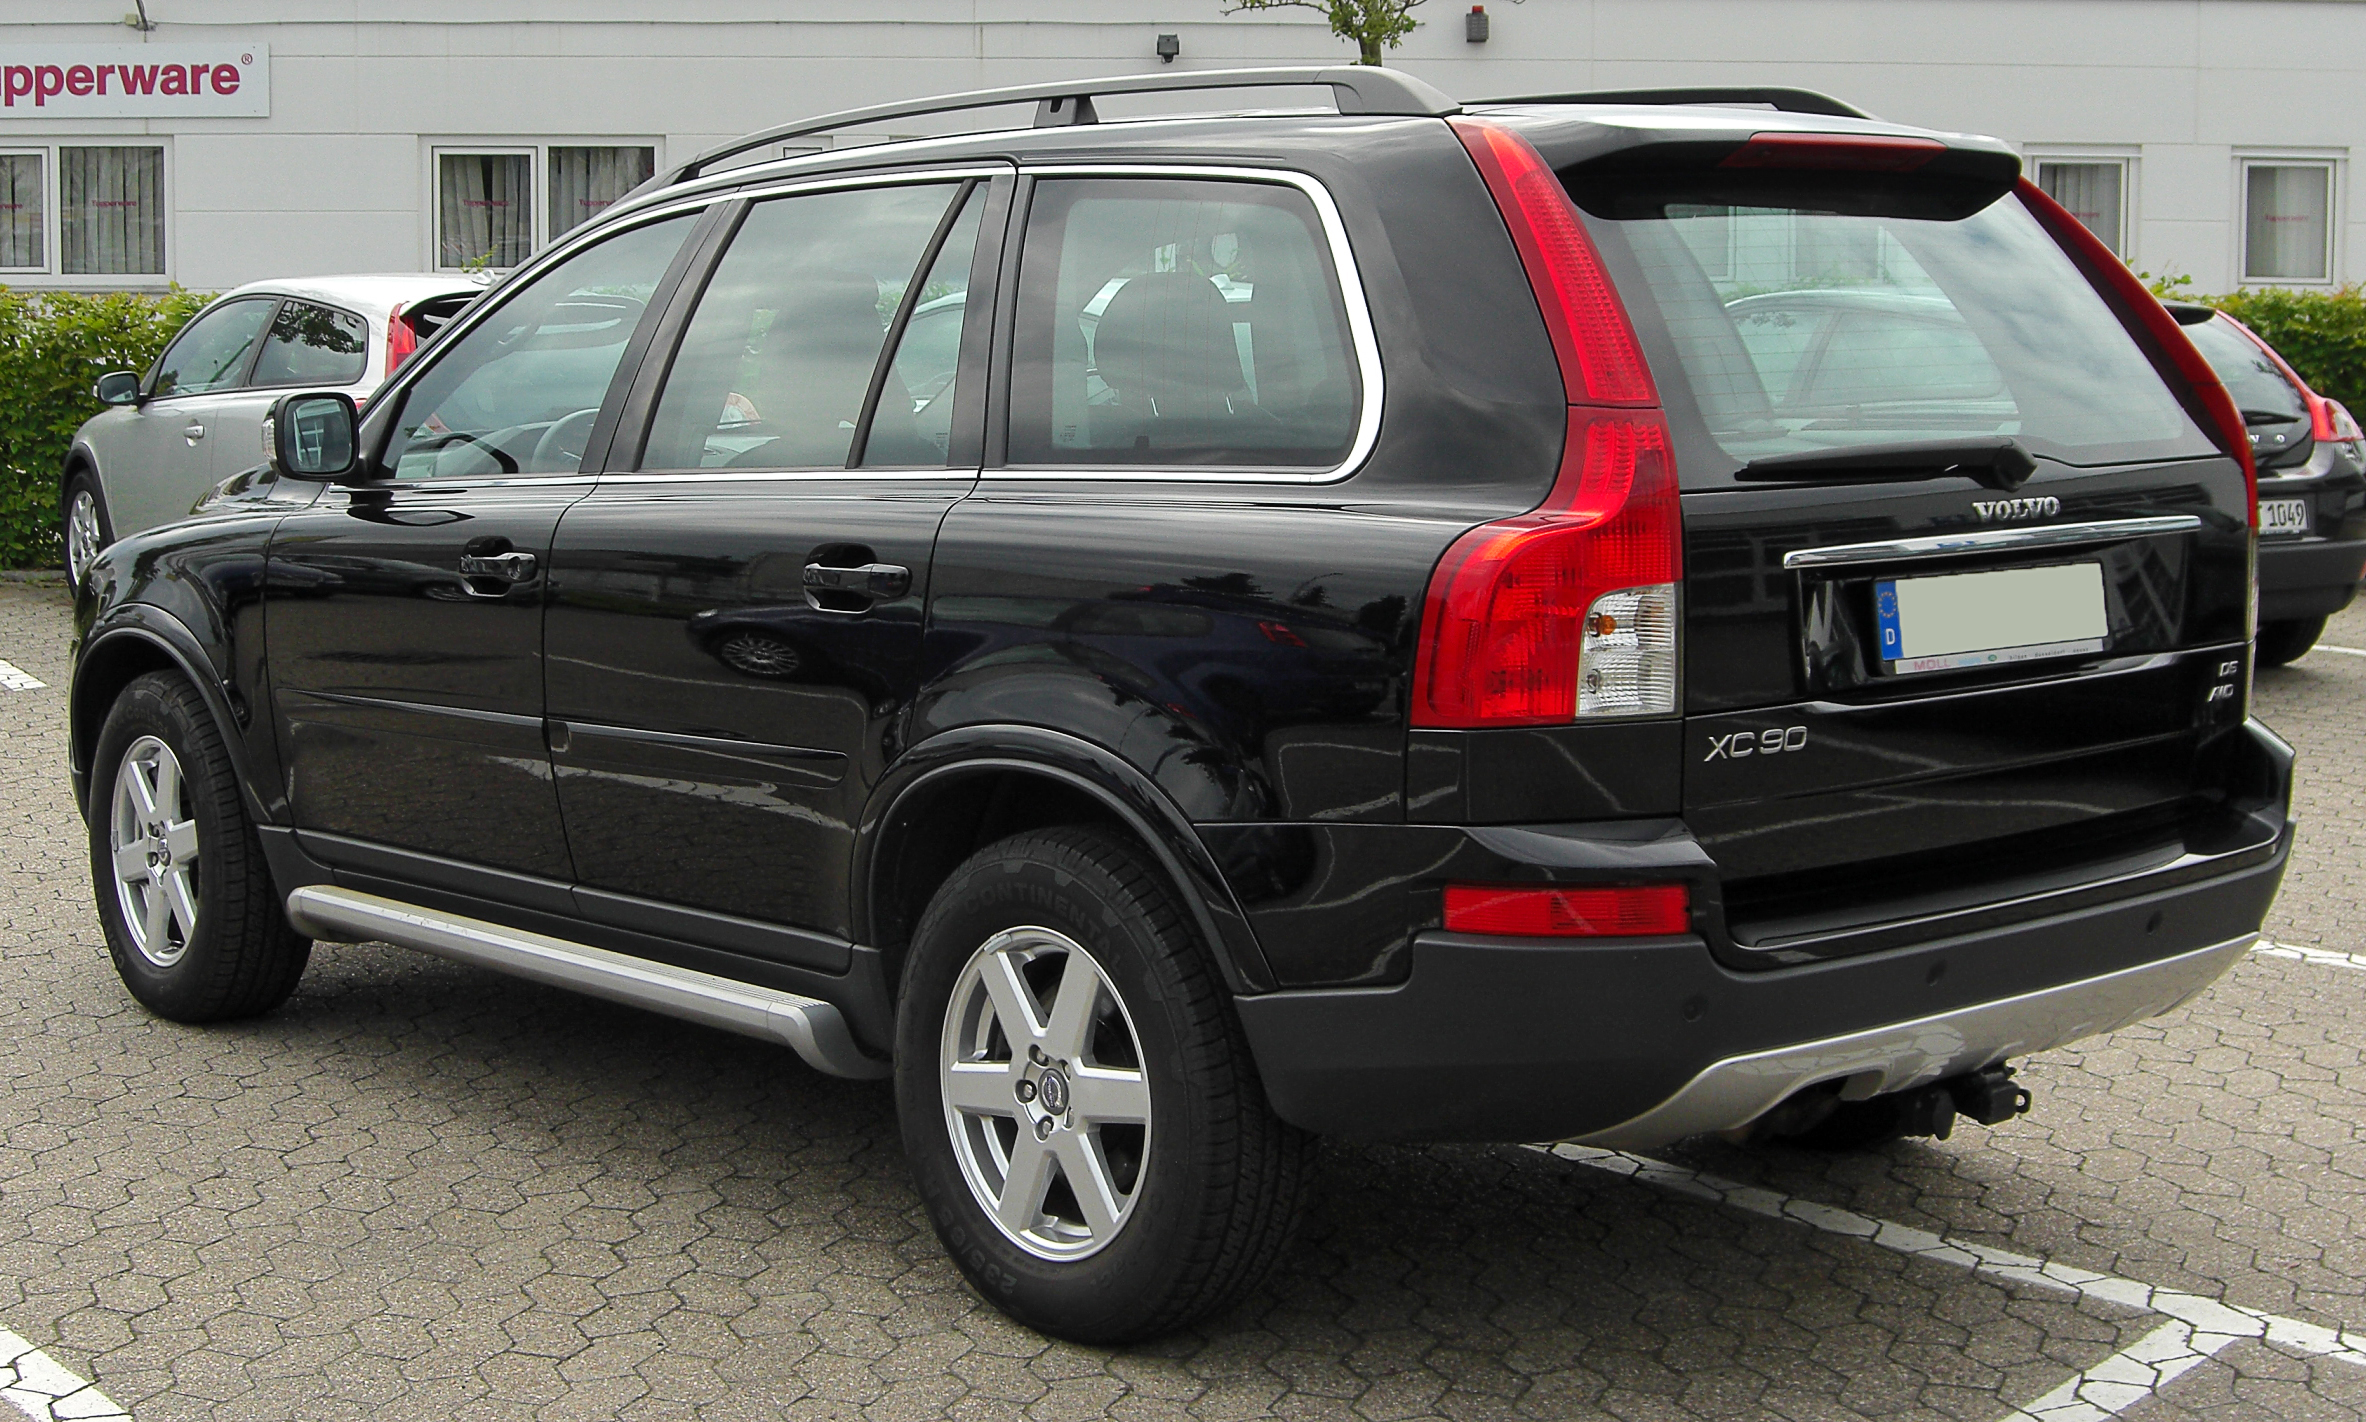 Volvo Xc90 D5 Awd: Best Images Collection of Volvo Xc90 D5 Awd